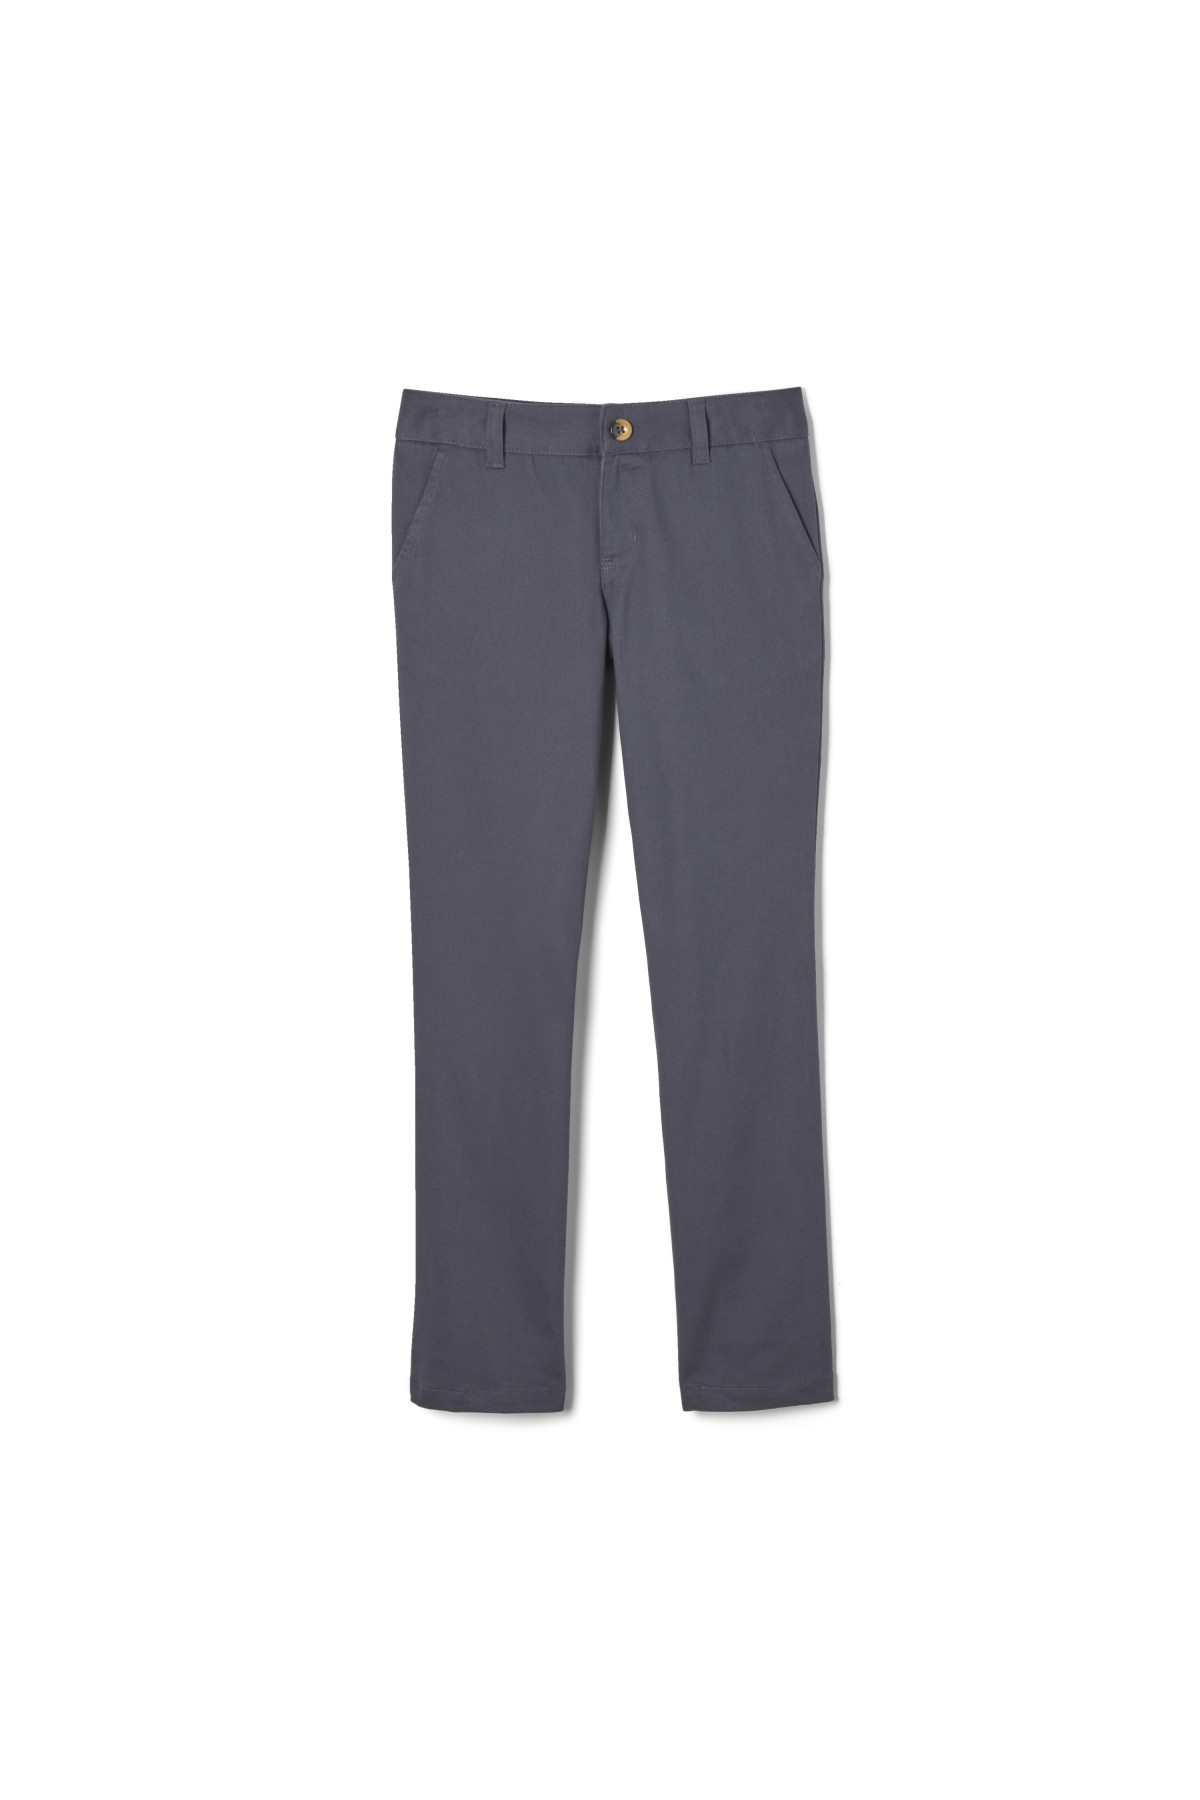 French Toast Girls Pull-On Twill Pant 